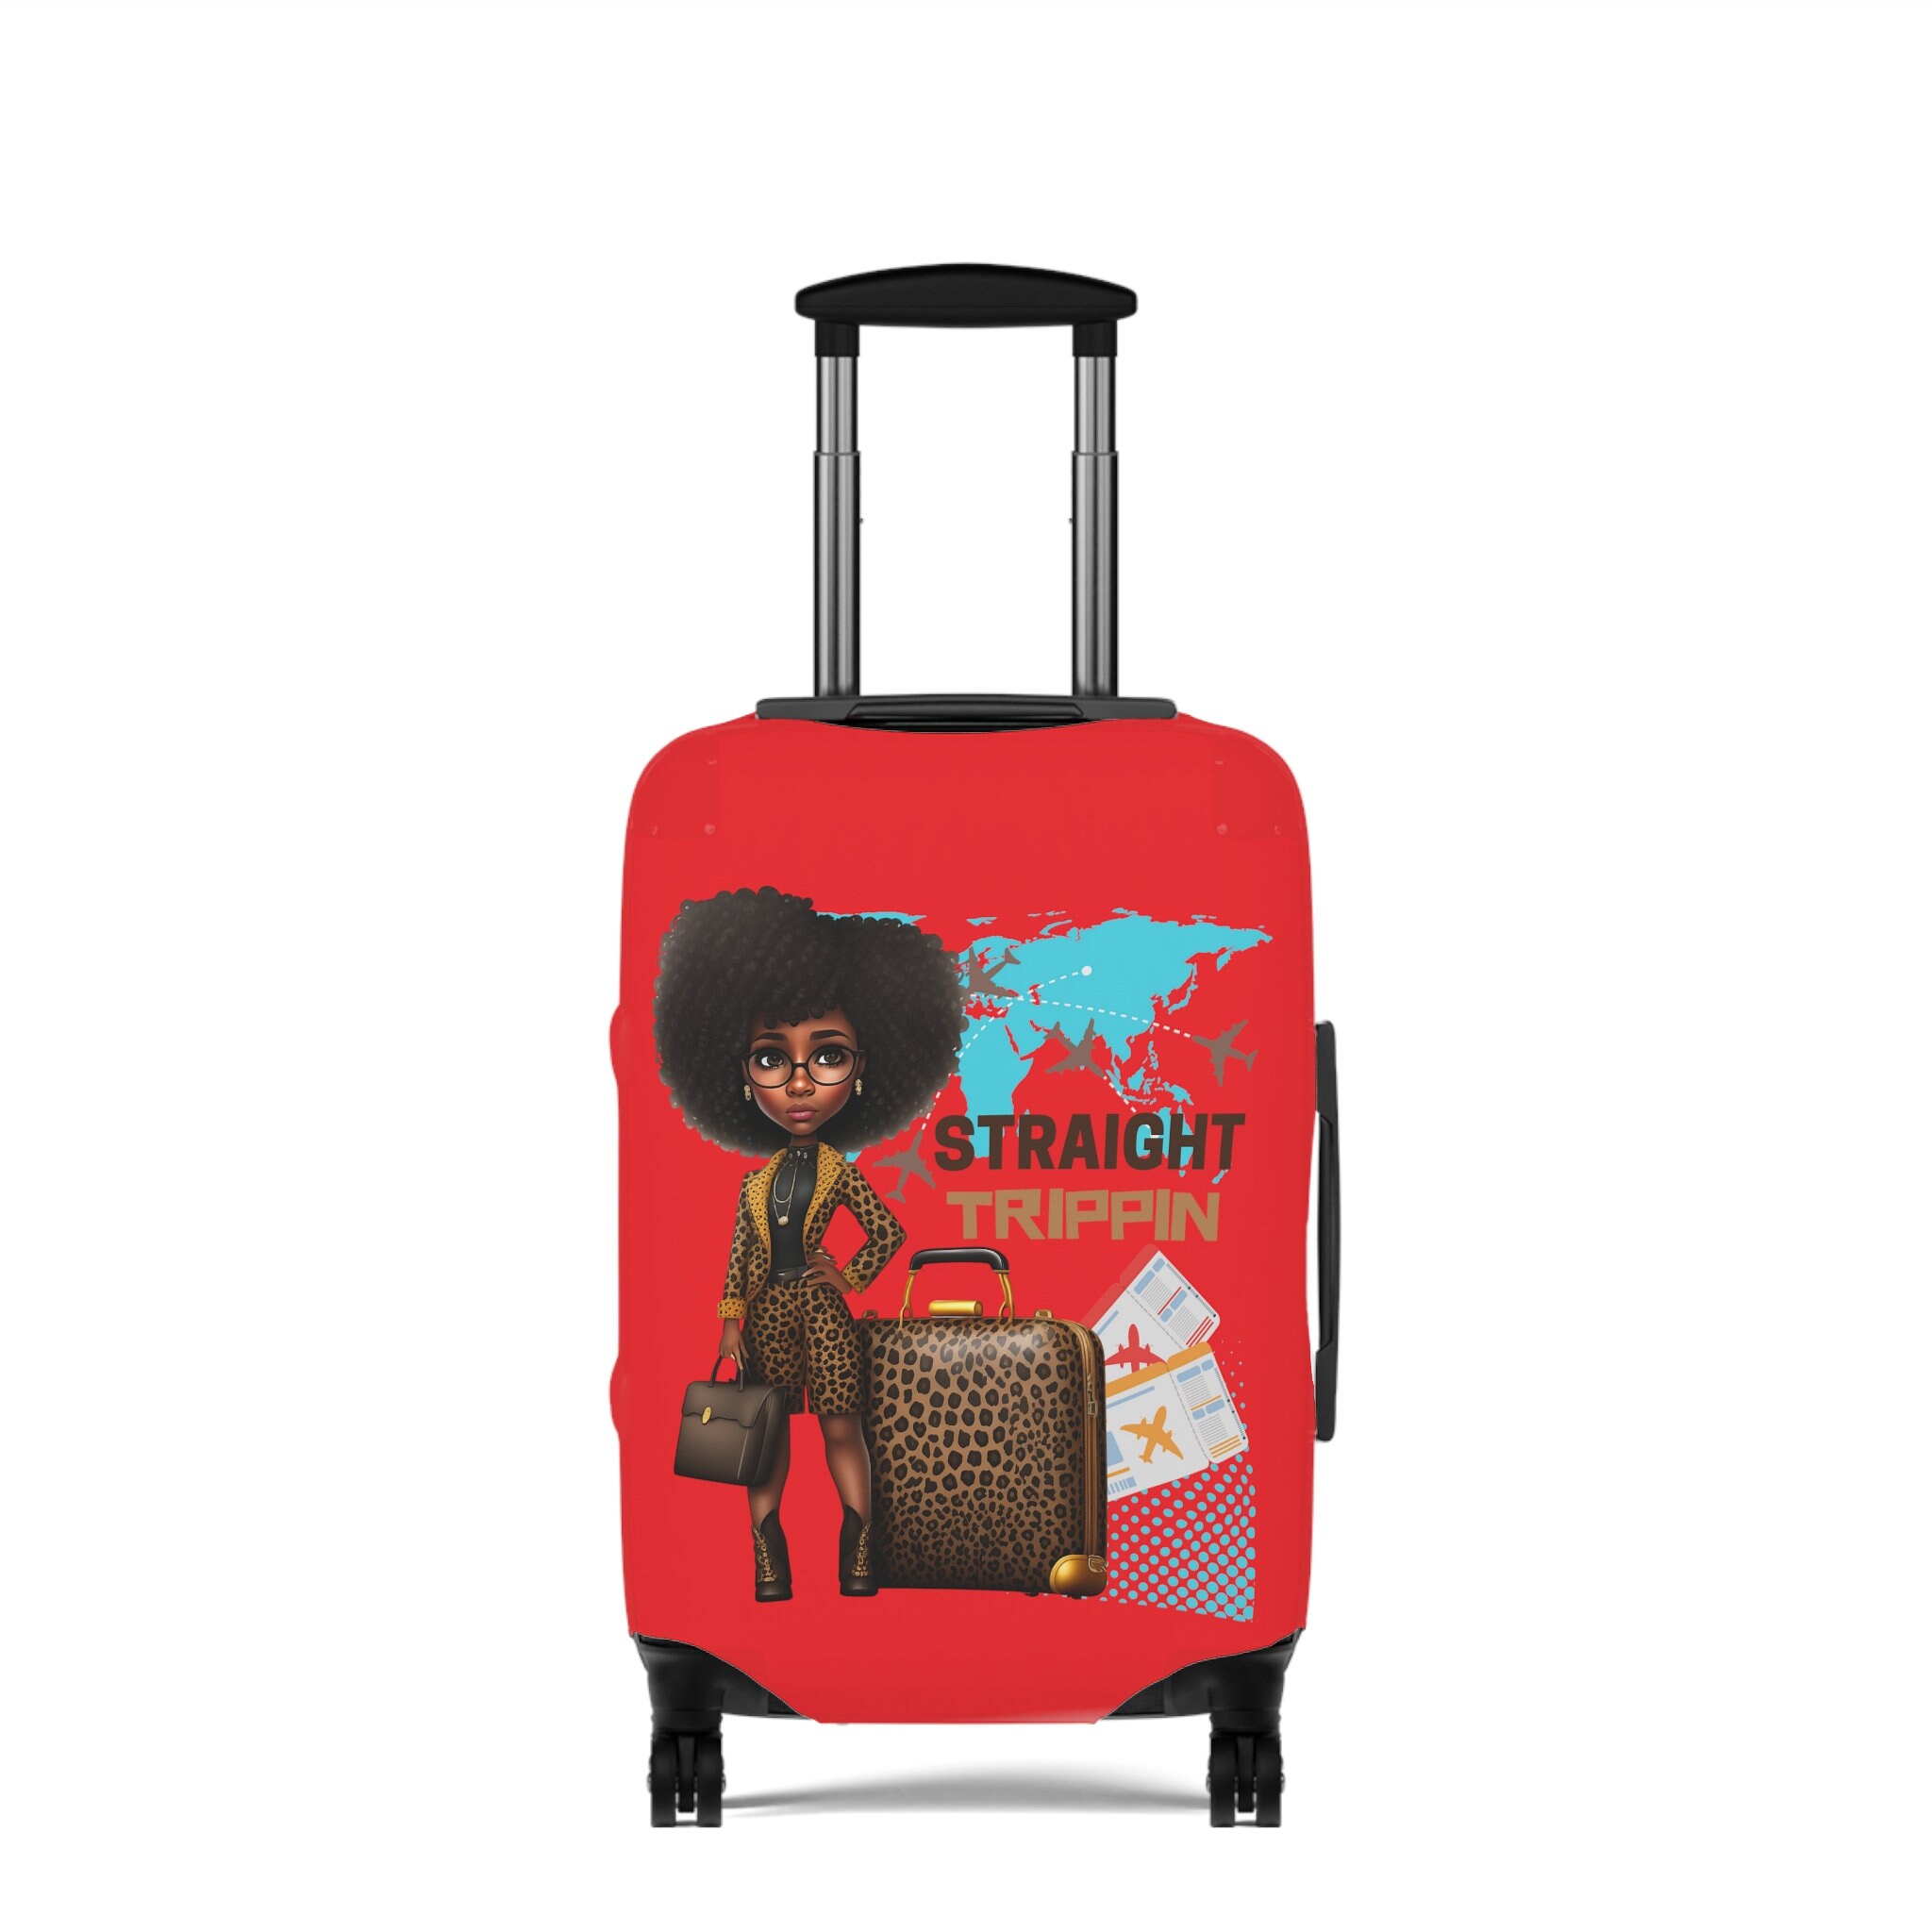 She's fierce and catching flights - "Straight Trippin" Luggage Cover